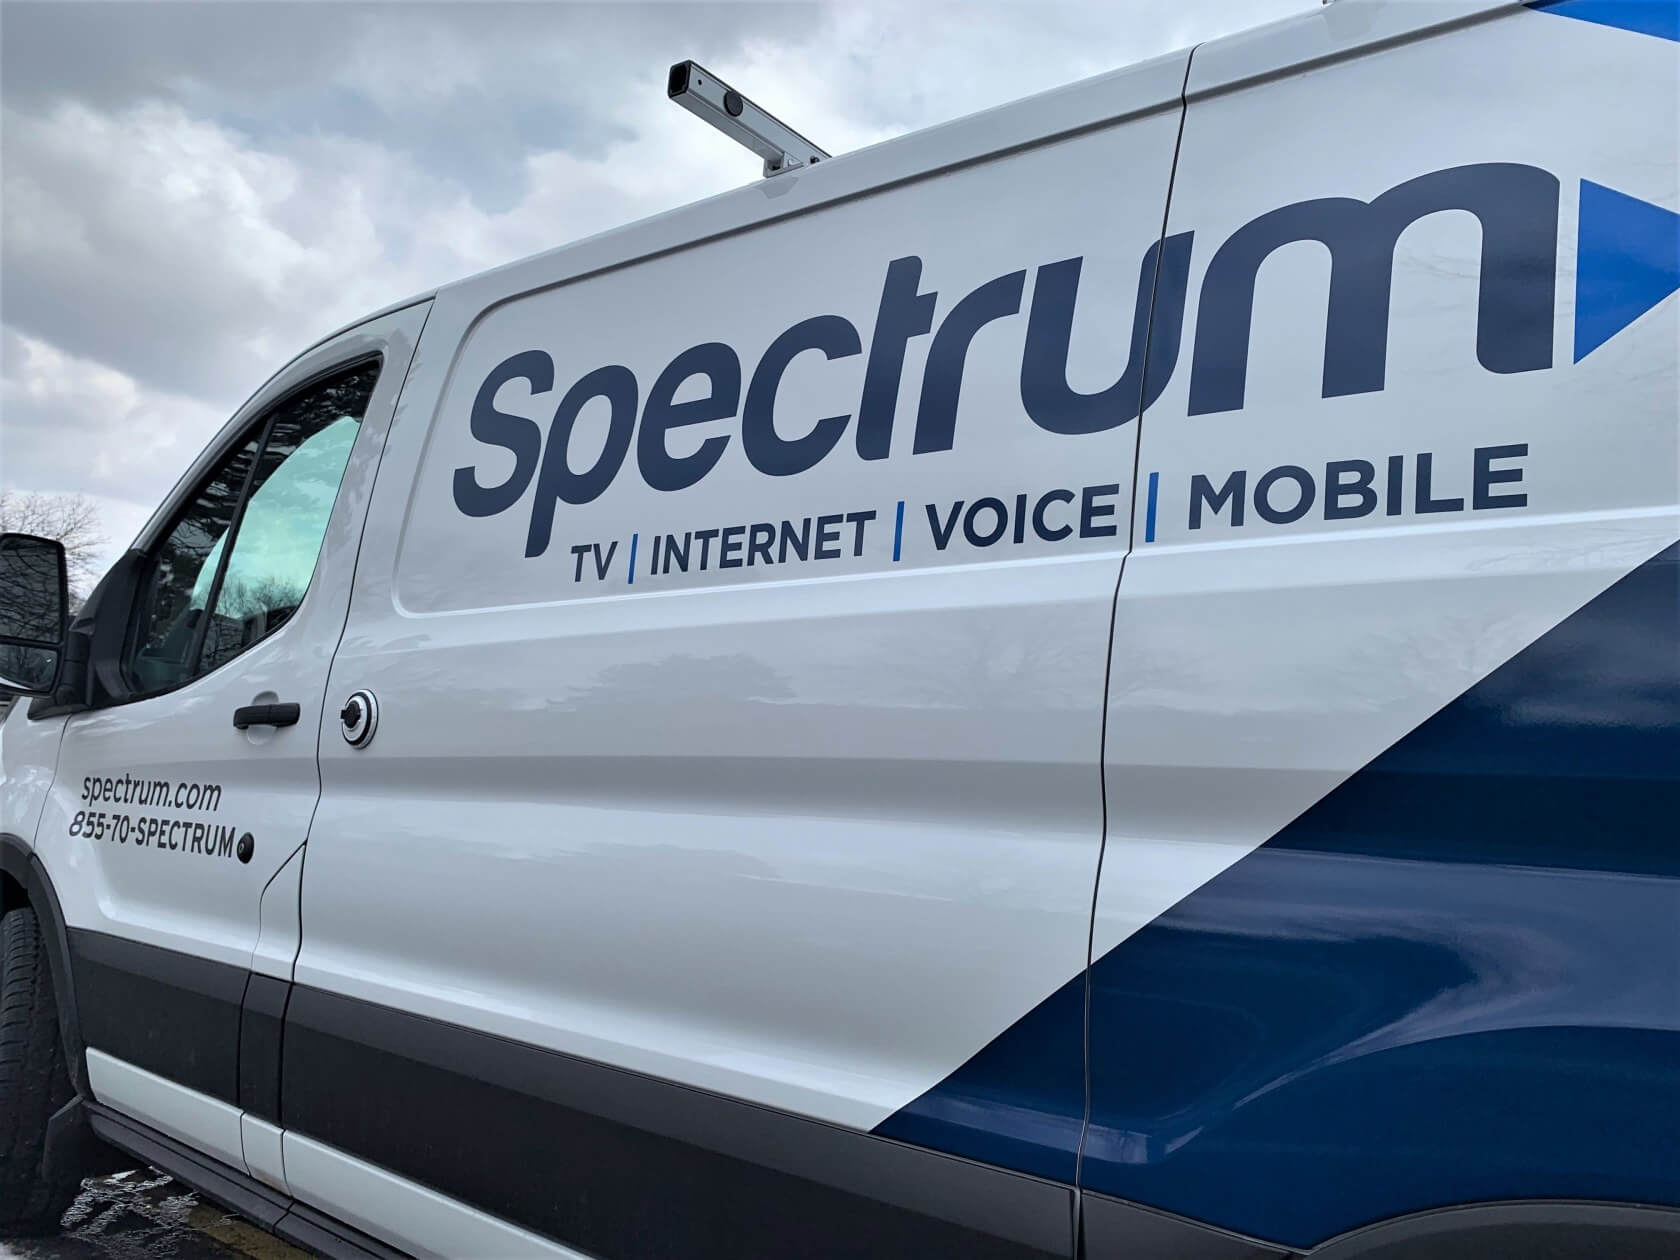 Spectrum Home Security customers may be left with useless equipment following service termination